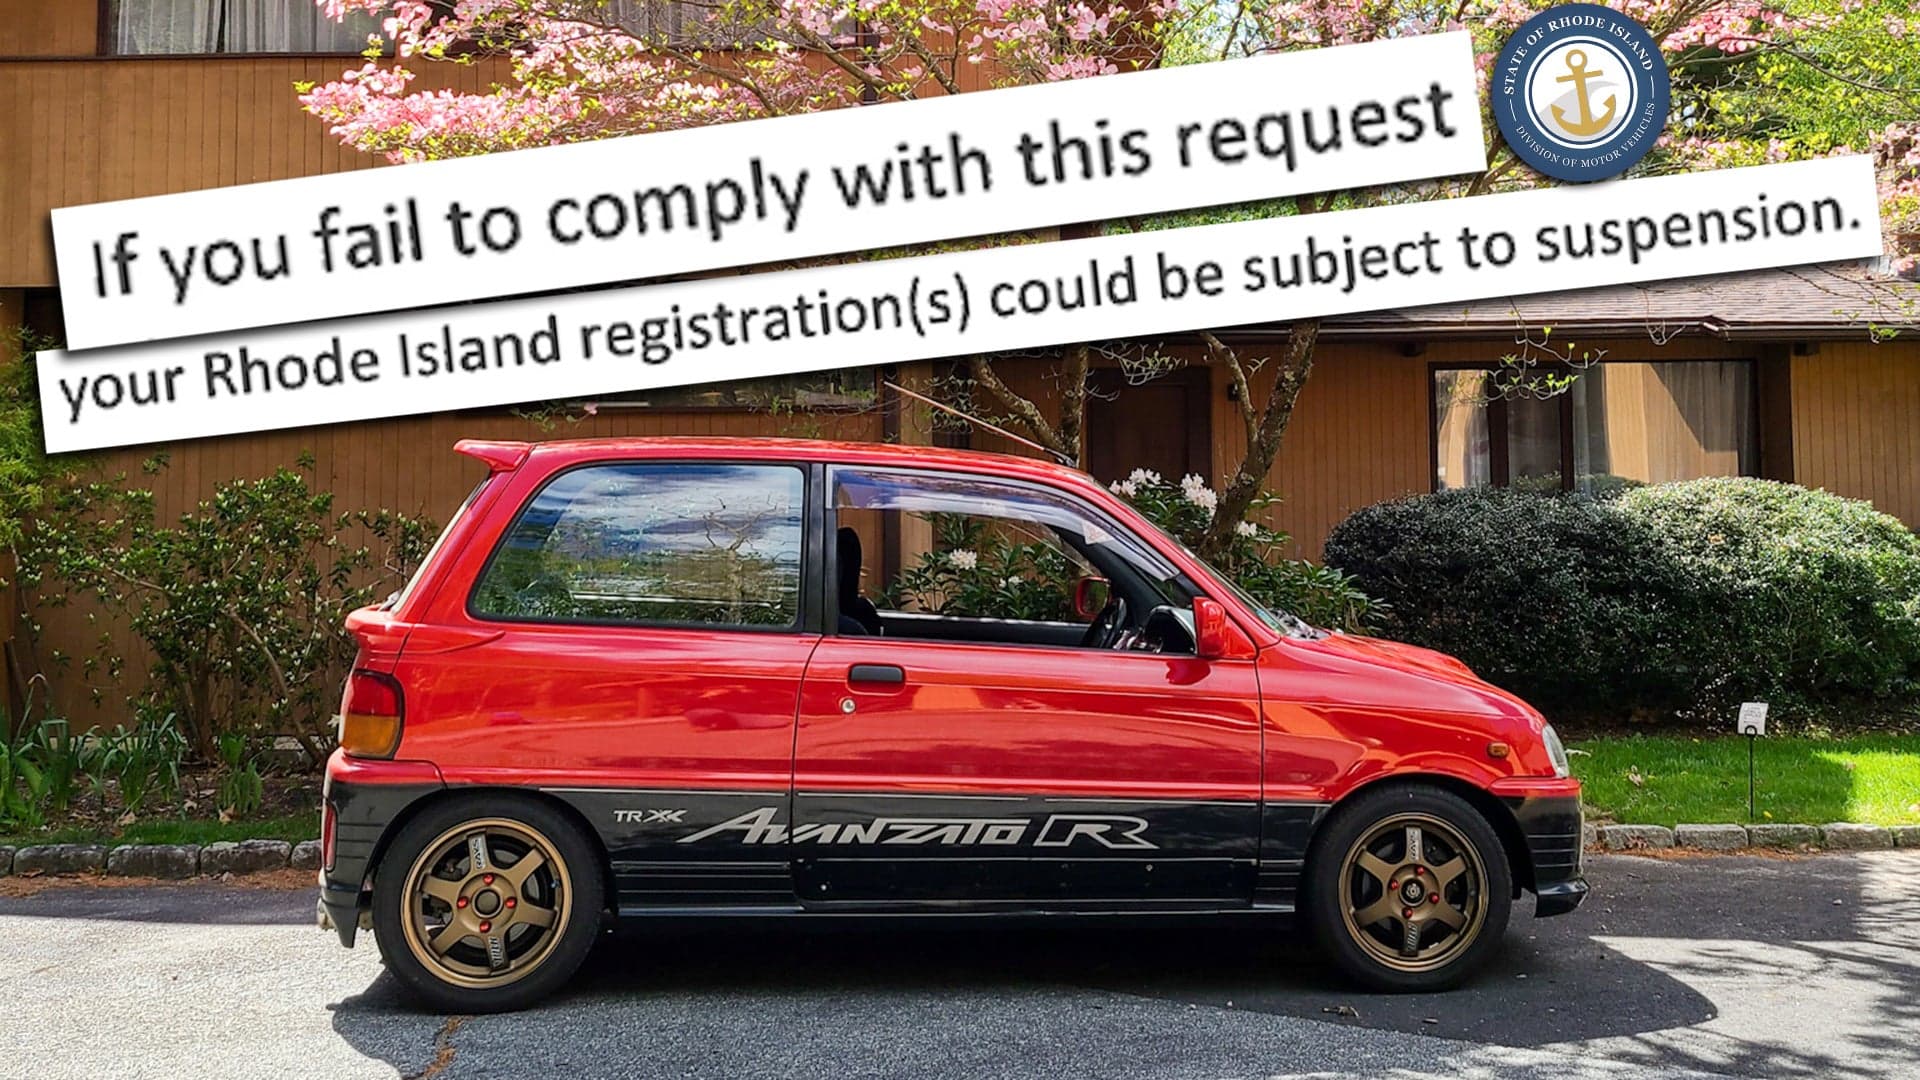 Rhode Island Is Trying to De-Register Kei Cars Too, But It Has a Fight on Its Hands